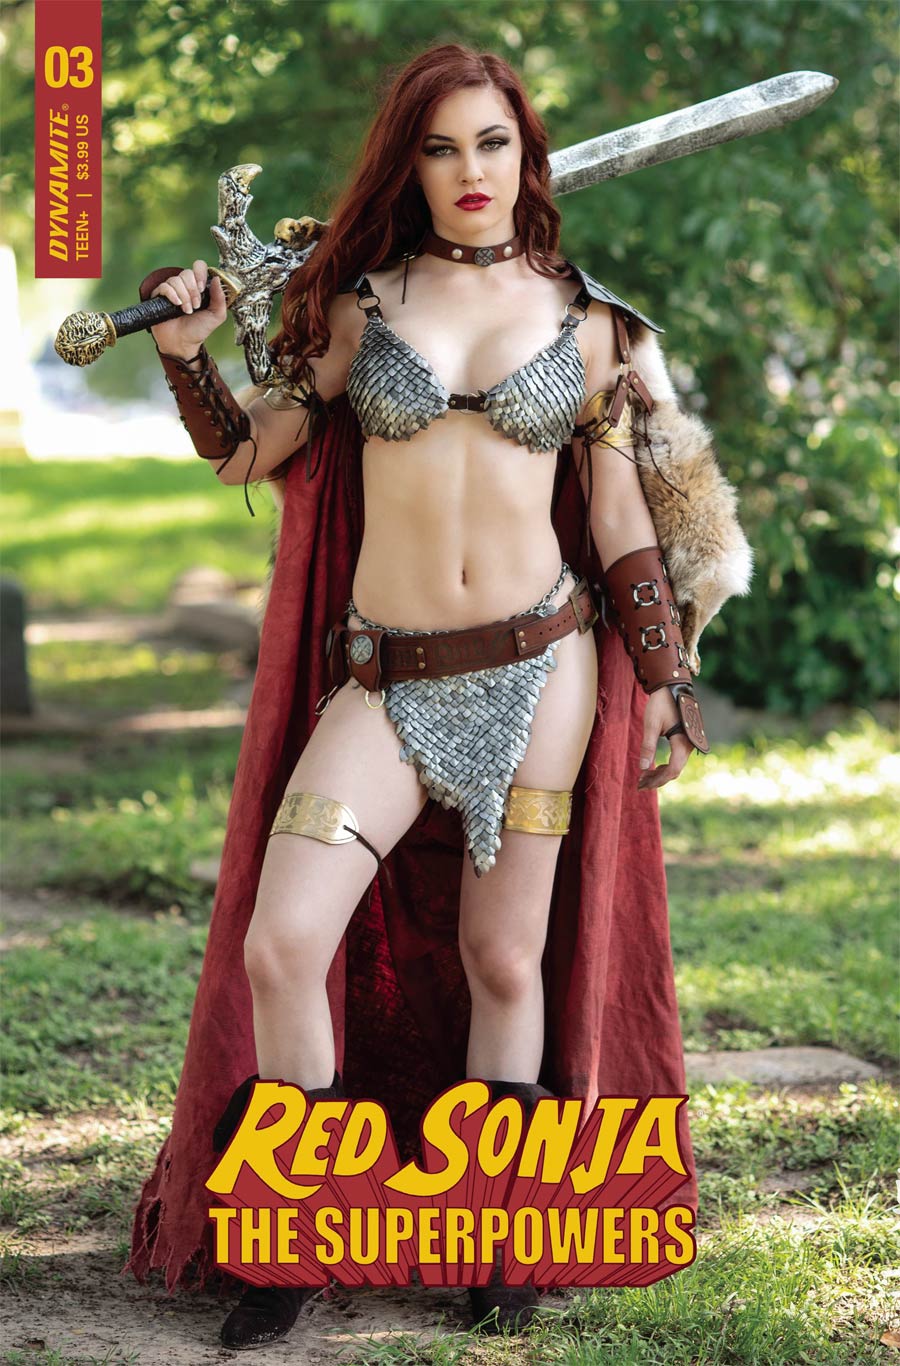 Red Sonja The Superpowers #3 Cover E Variant Savannah Polson Cosplay Photo Cover